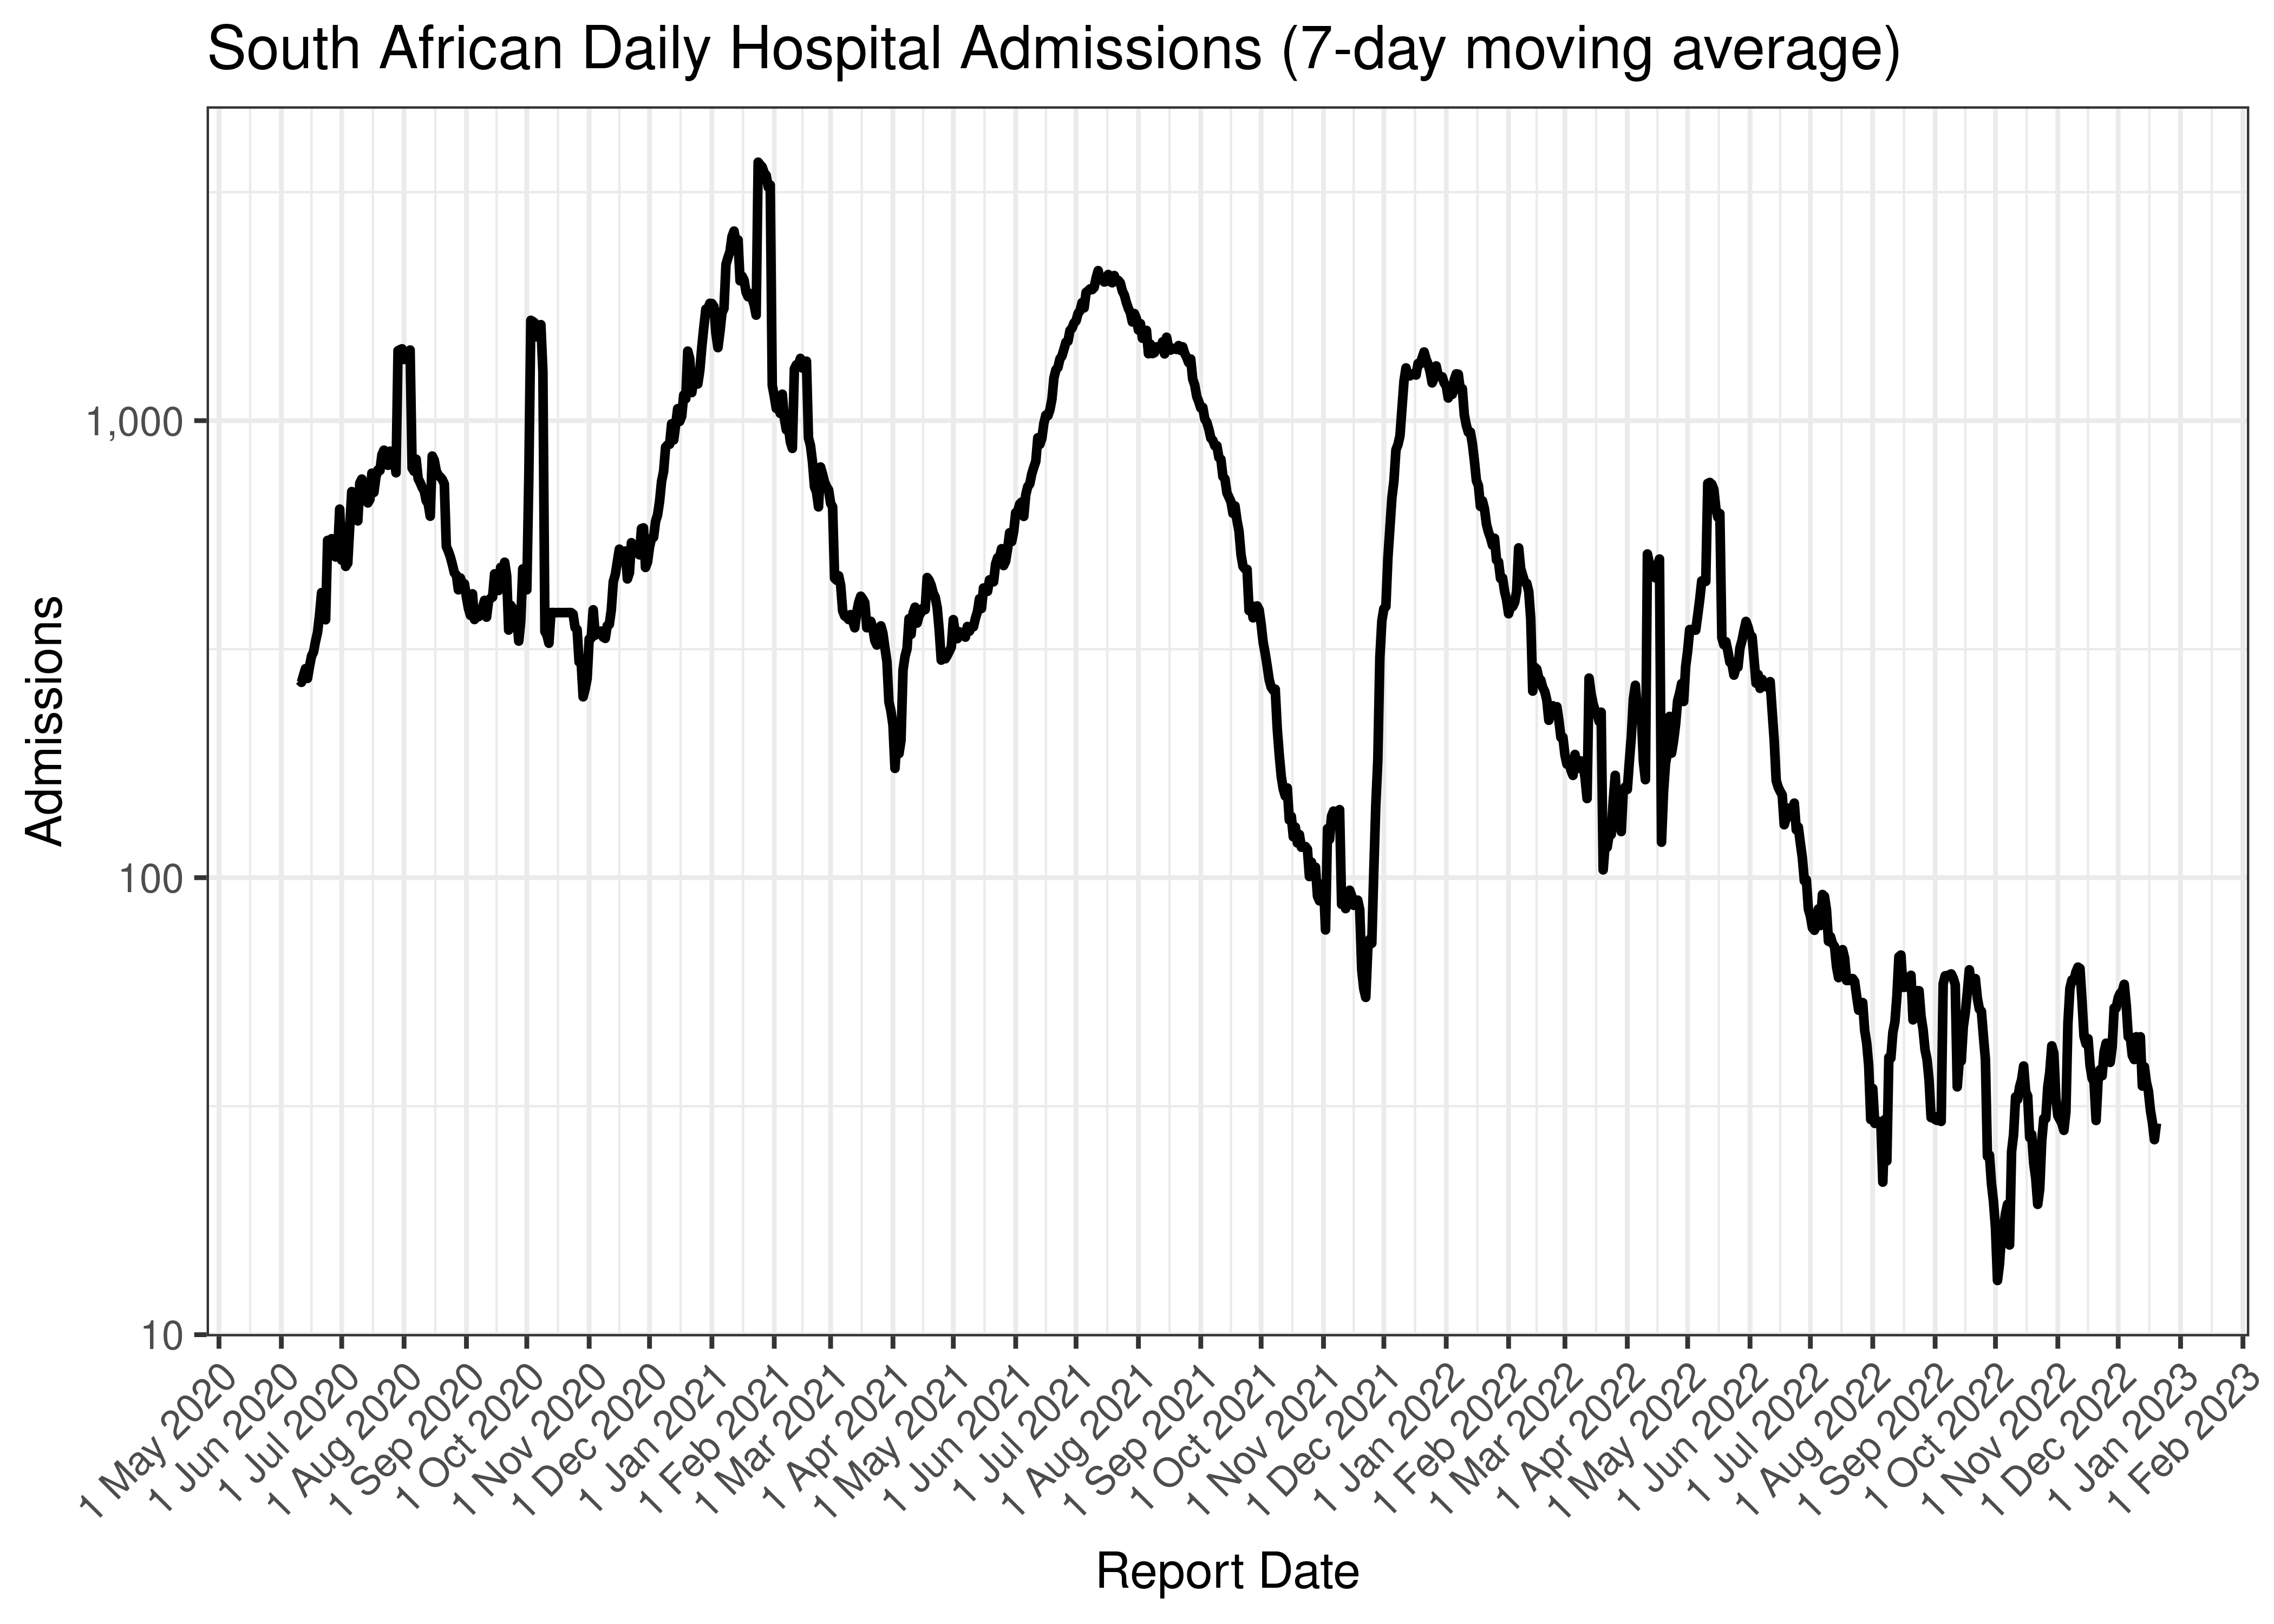 South African Daily Hospital Admissions (7-day moving average)